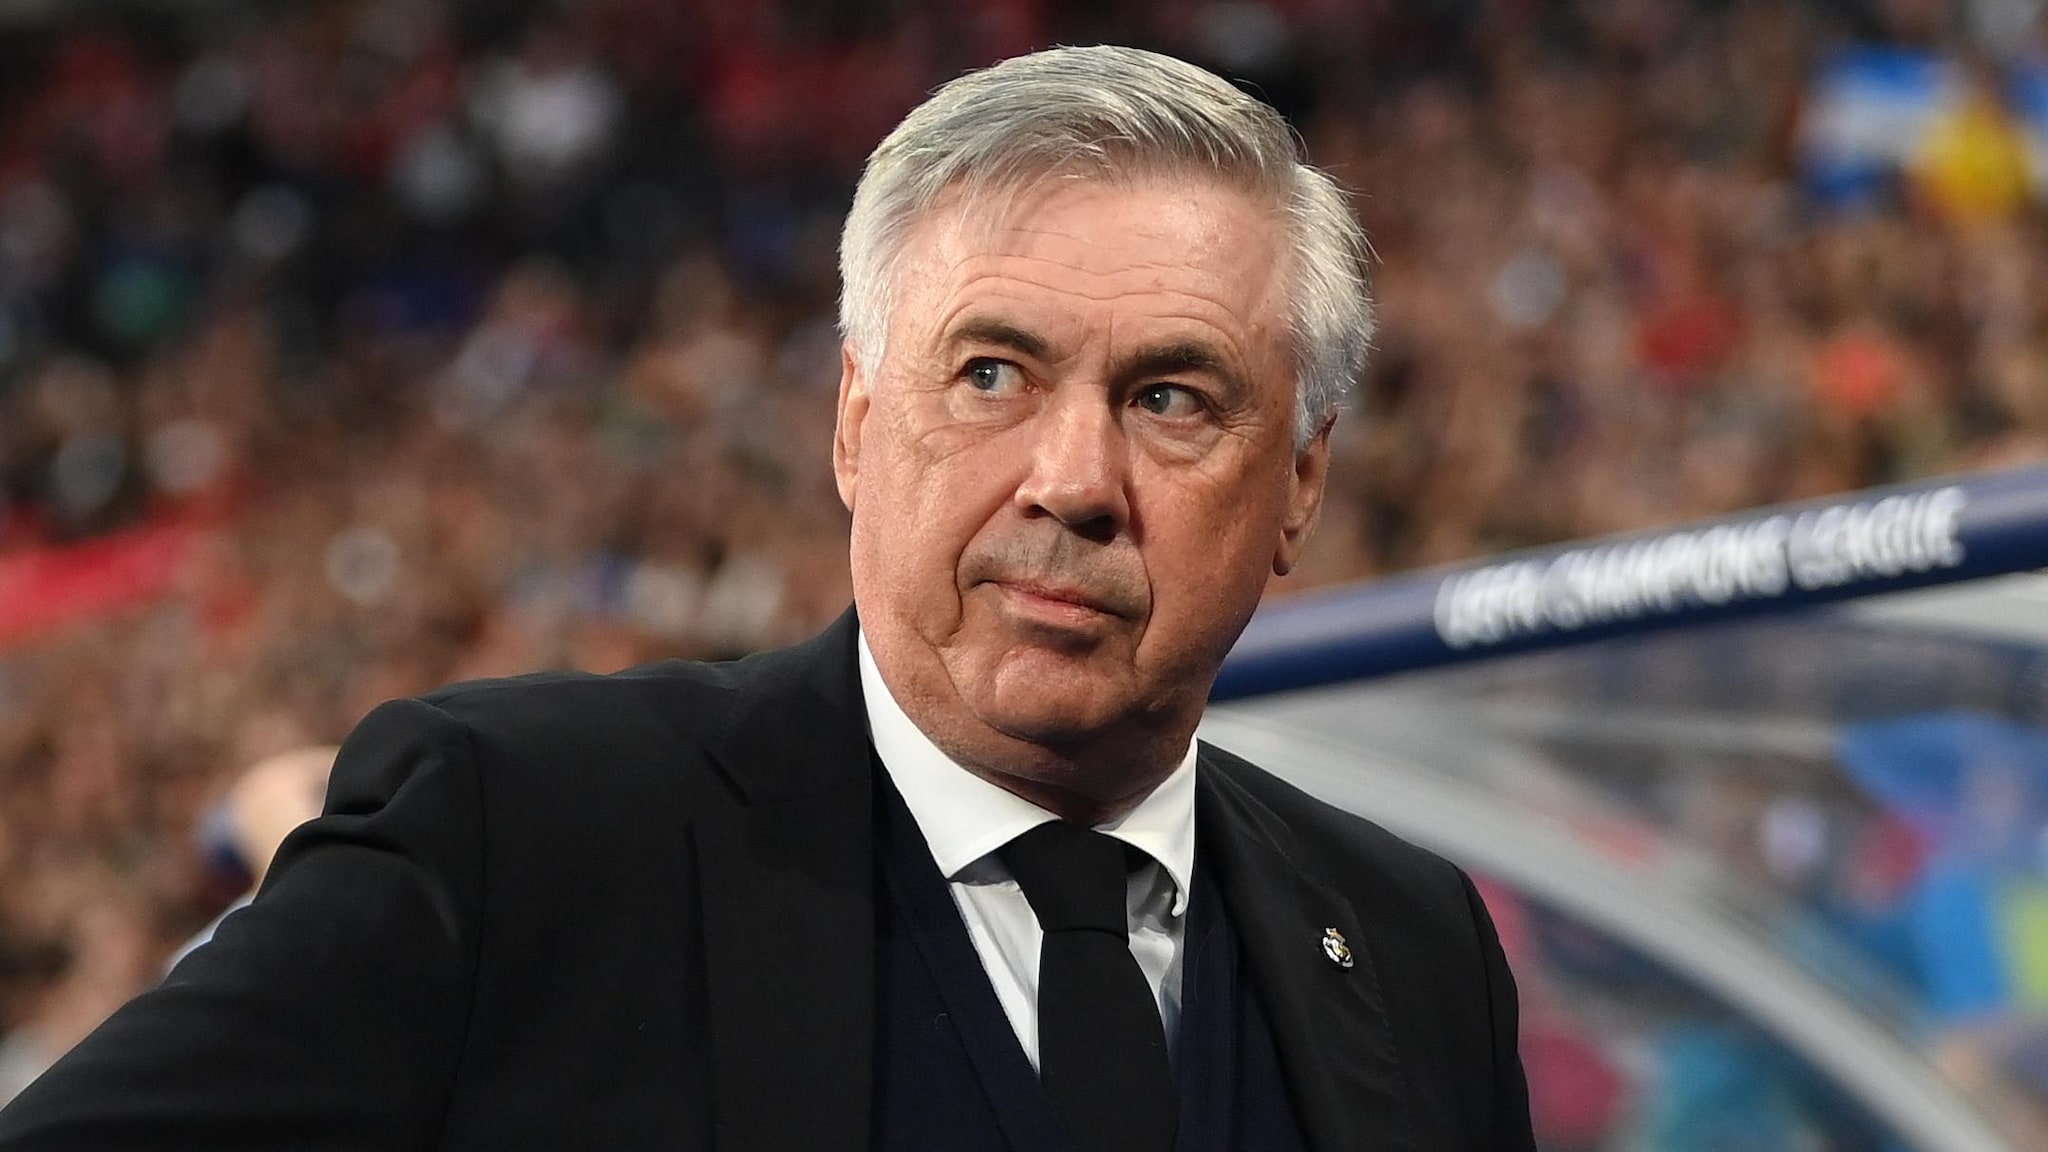 "I am Innocent" -- Ancelotti begs over Fraud accusations